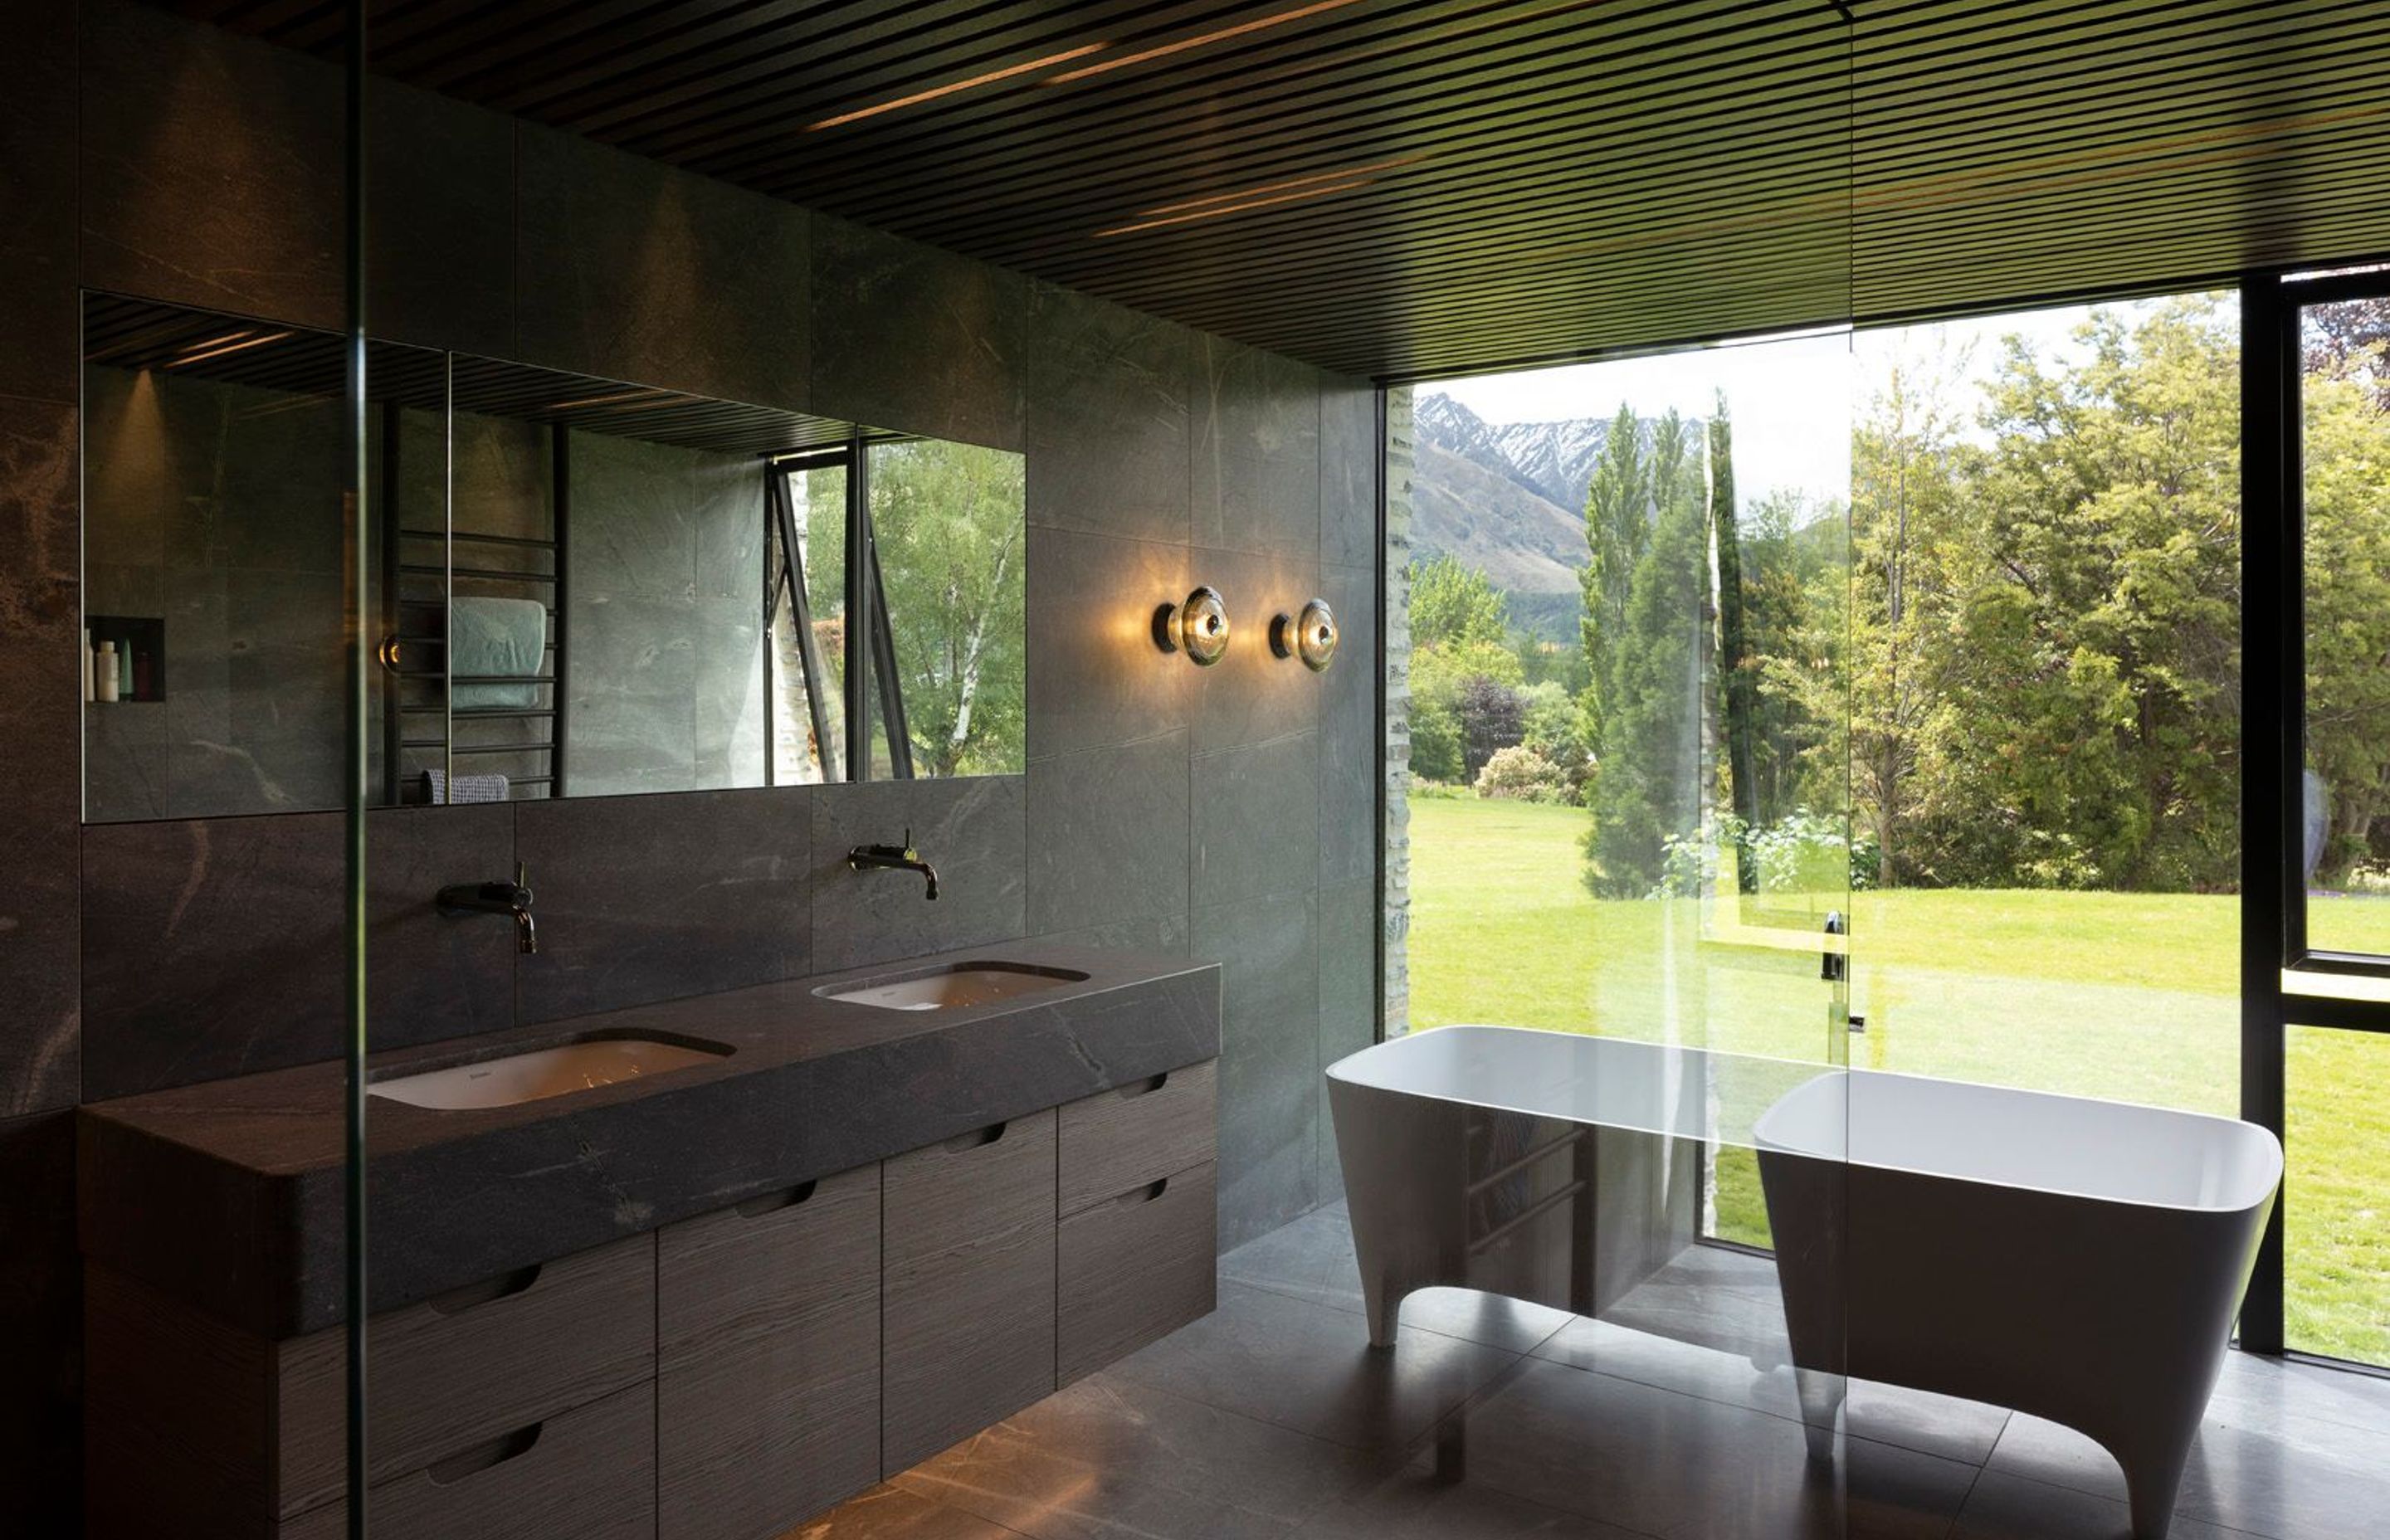 A floor-to-ceiling window in the bathroom brings the lush colours of the outside landscape into the interior, which is elegant in a restrained palette of greys.